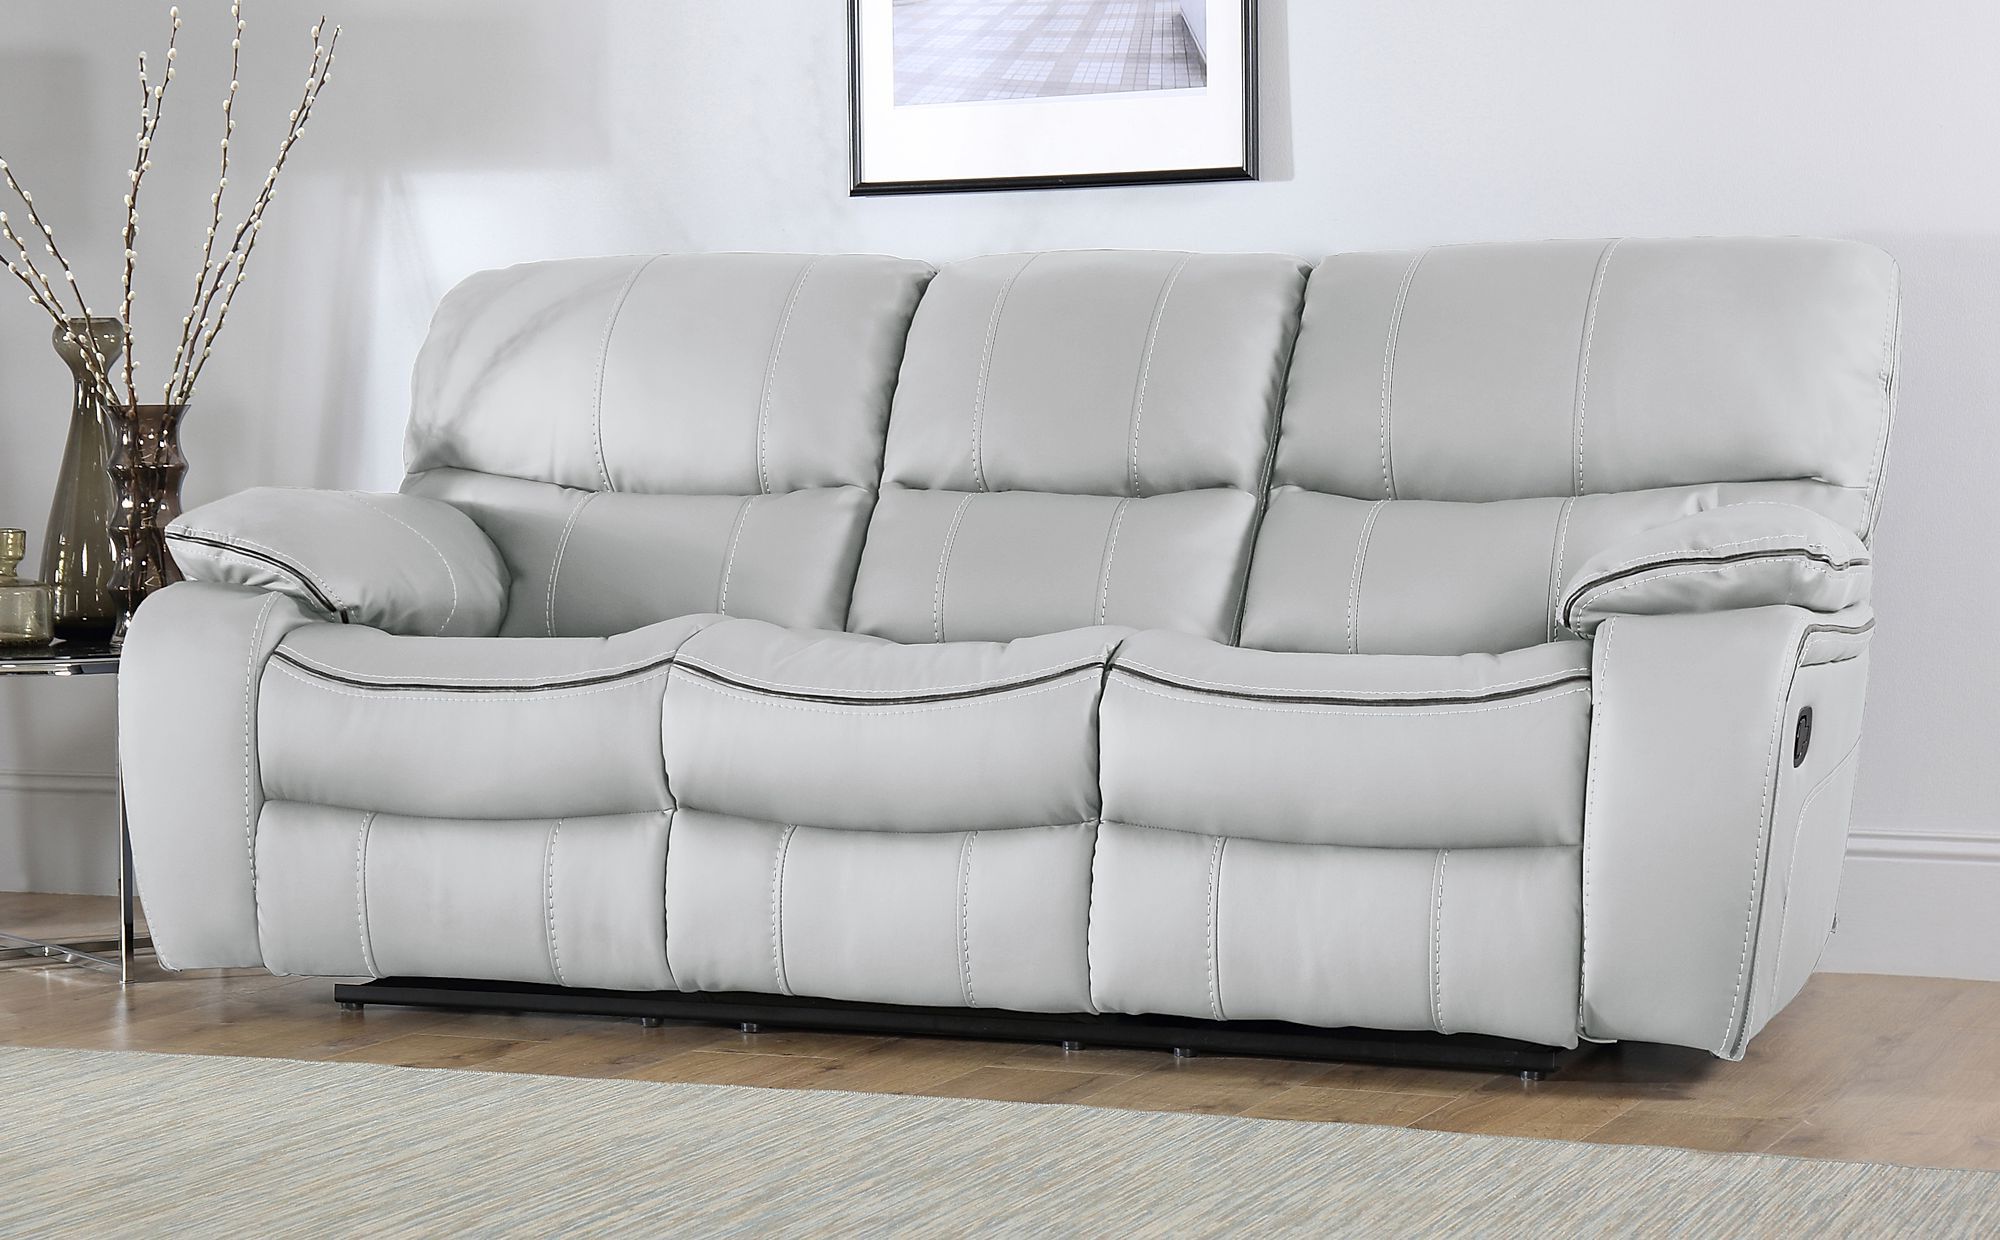 Furniture Choice Pertaining To Widely Used Sofas In Light Gray (View 5 of 15)